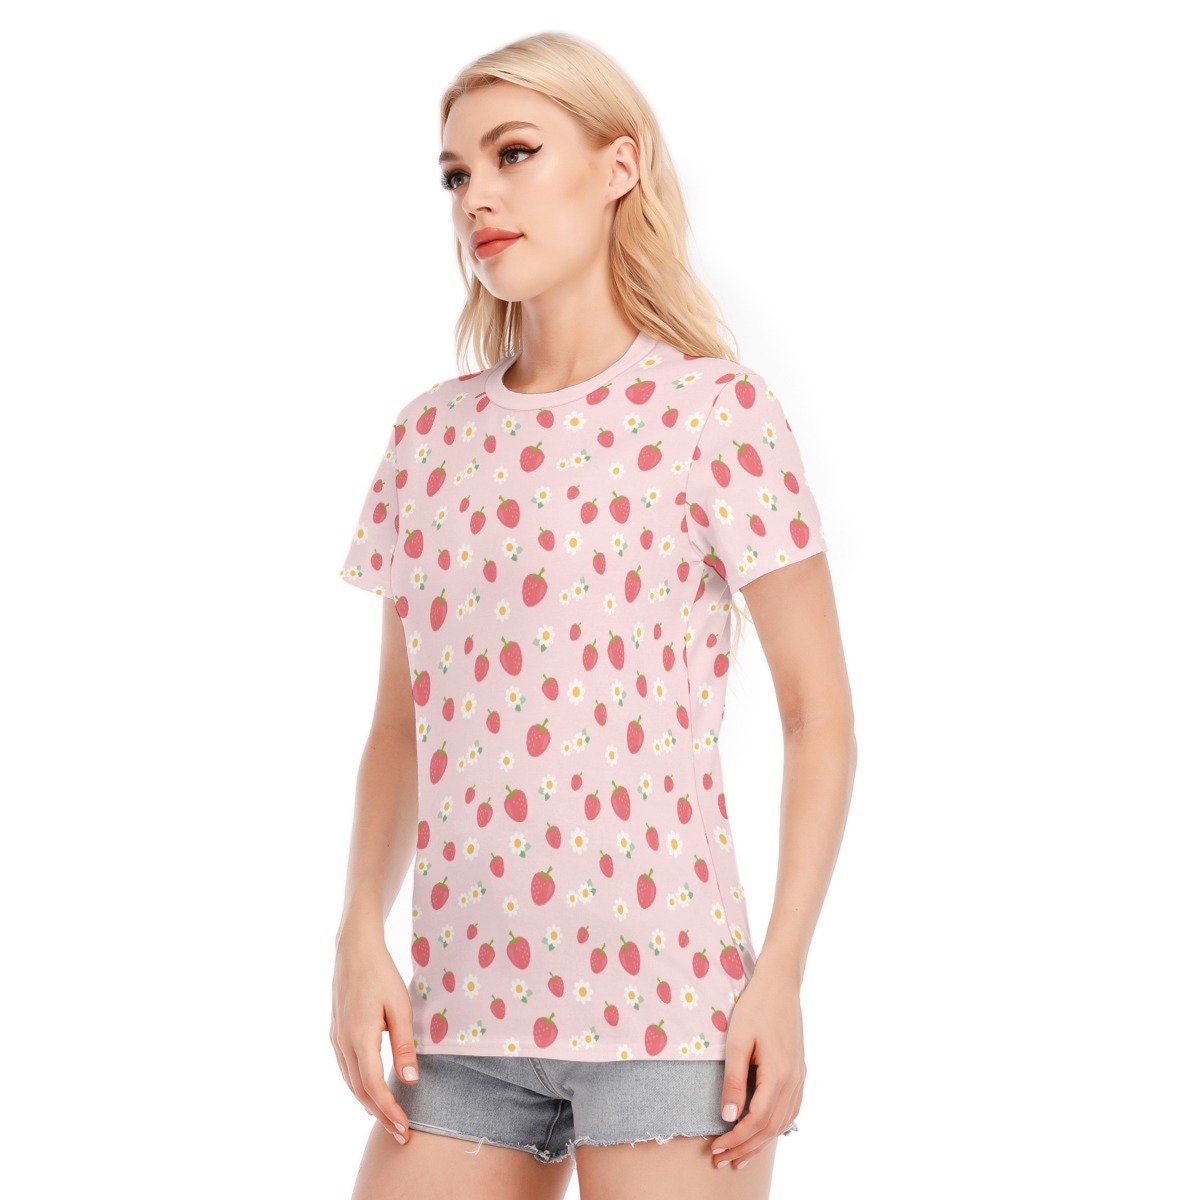 Strawberry Tshirt, Pink Strawberry Top, Strawberry Print Top, Womens tops, Summer Top Women, Unique Tshirt, Strawberry Pattern Top, Pink Top